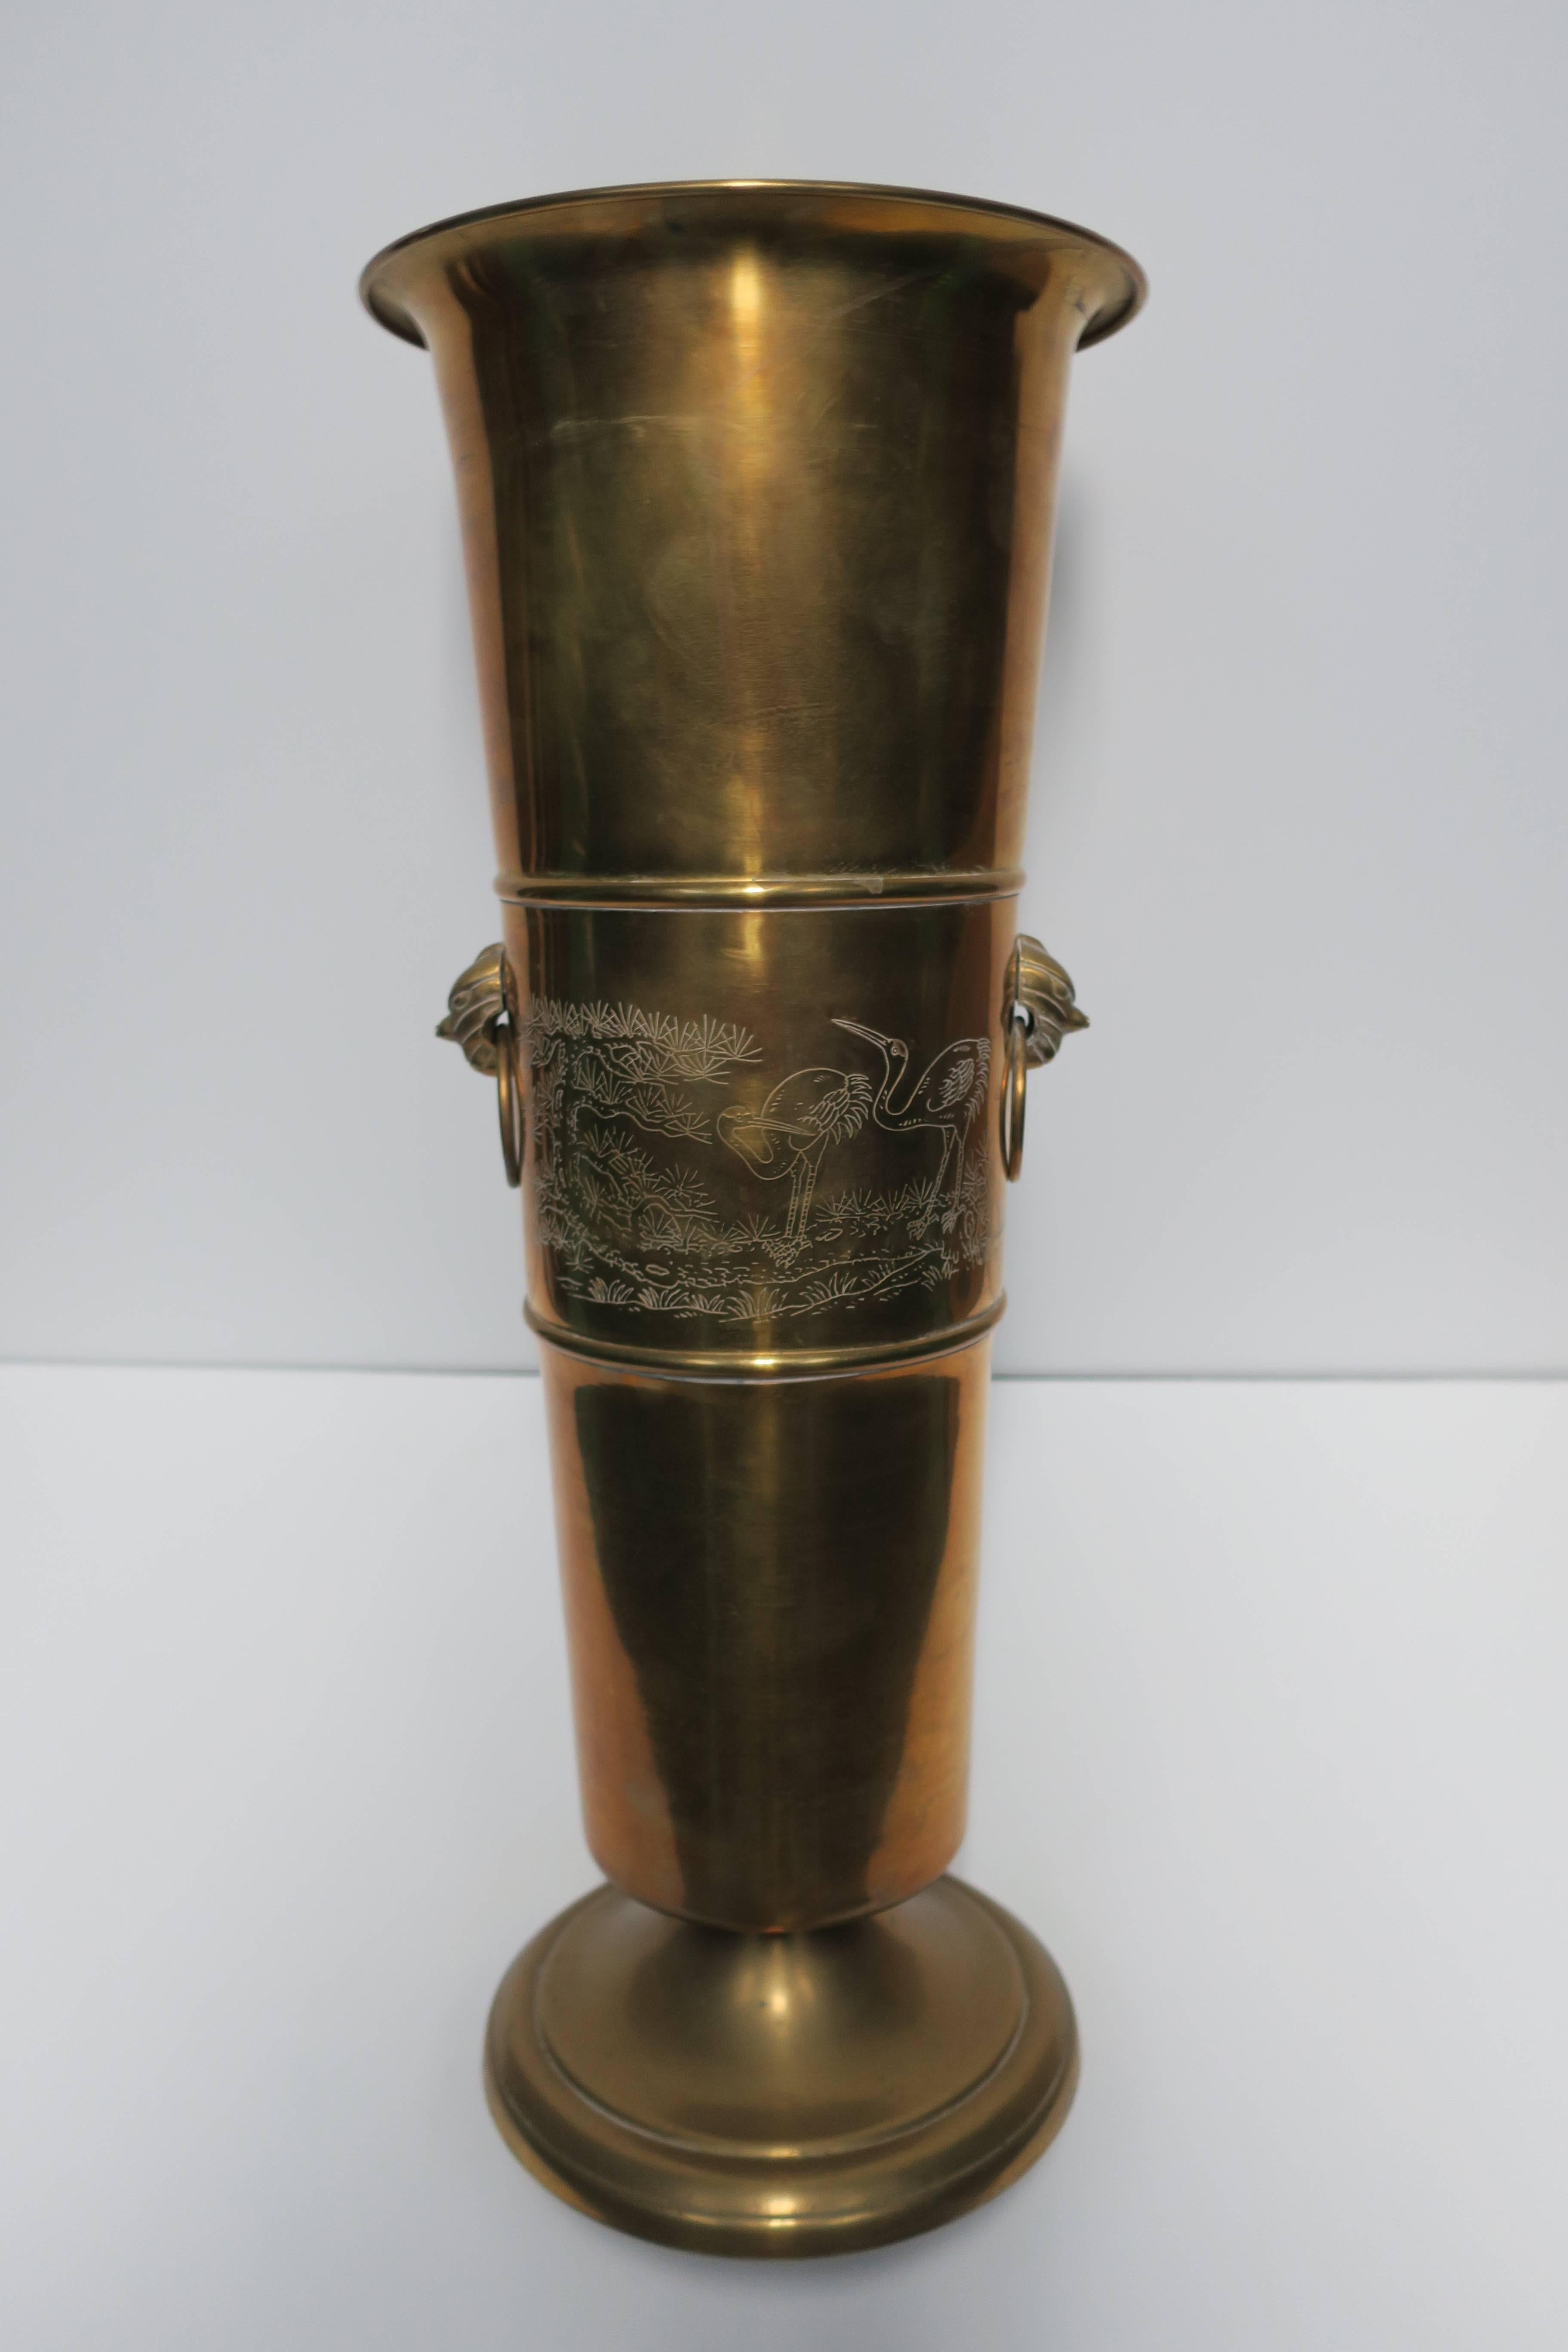 A vintage brass 'Urn' shape umbrella stand with decorative 'loop' sides and embossed decorative scenes on front (two embossed 'Stag's' or deer on one side, and two crane birds on the other.) 

Measurements include: 22.5 in. H x 9 in. Diameter.